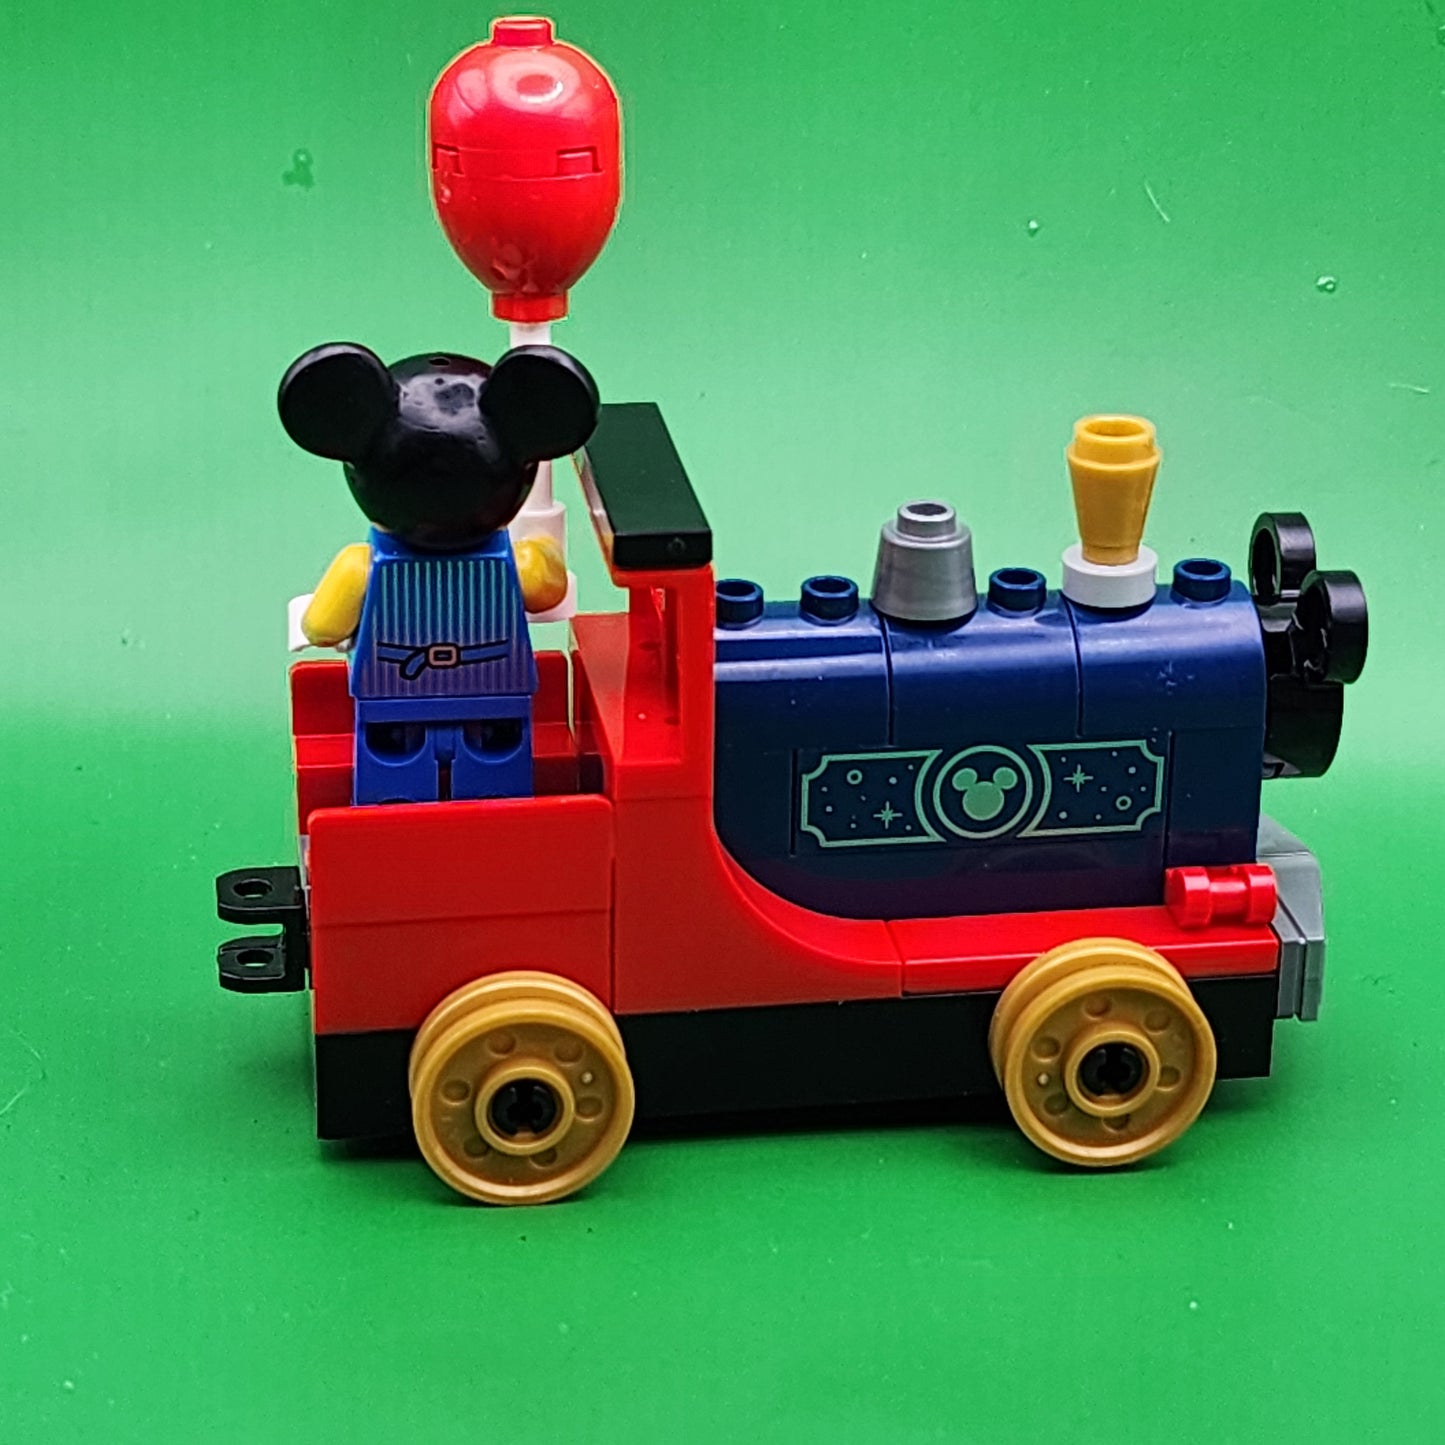 Lego Mickey Mouse With Train Conductor Minifigure dis085